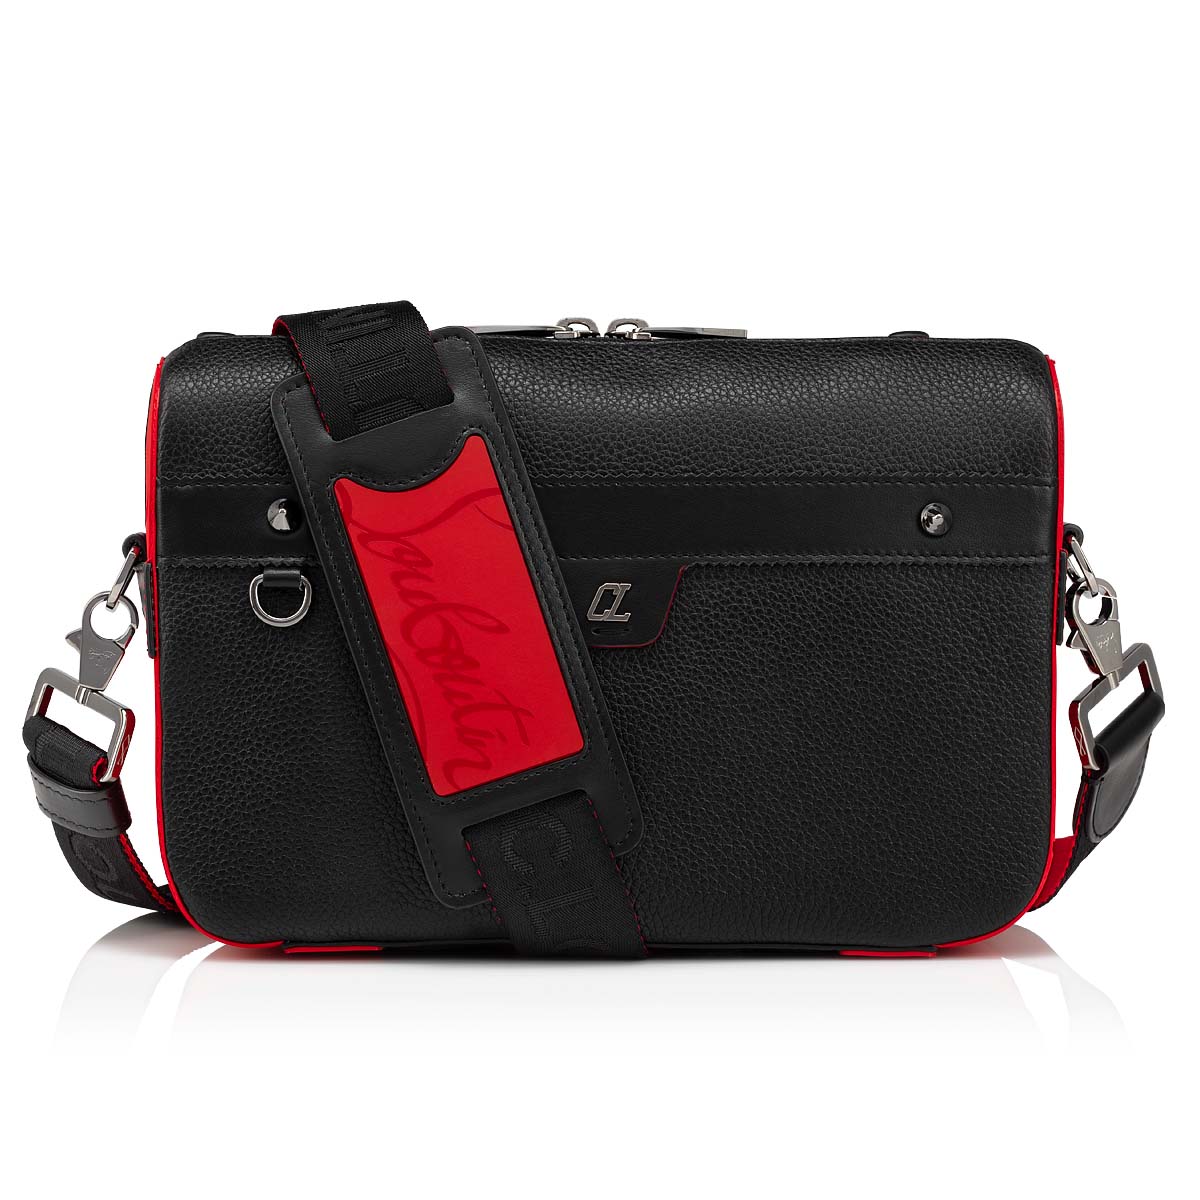 Christian Louboutin Bags for Women - Vestiaire Collective